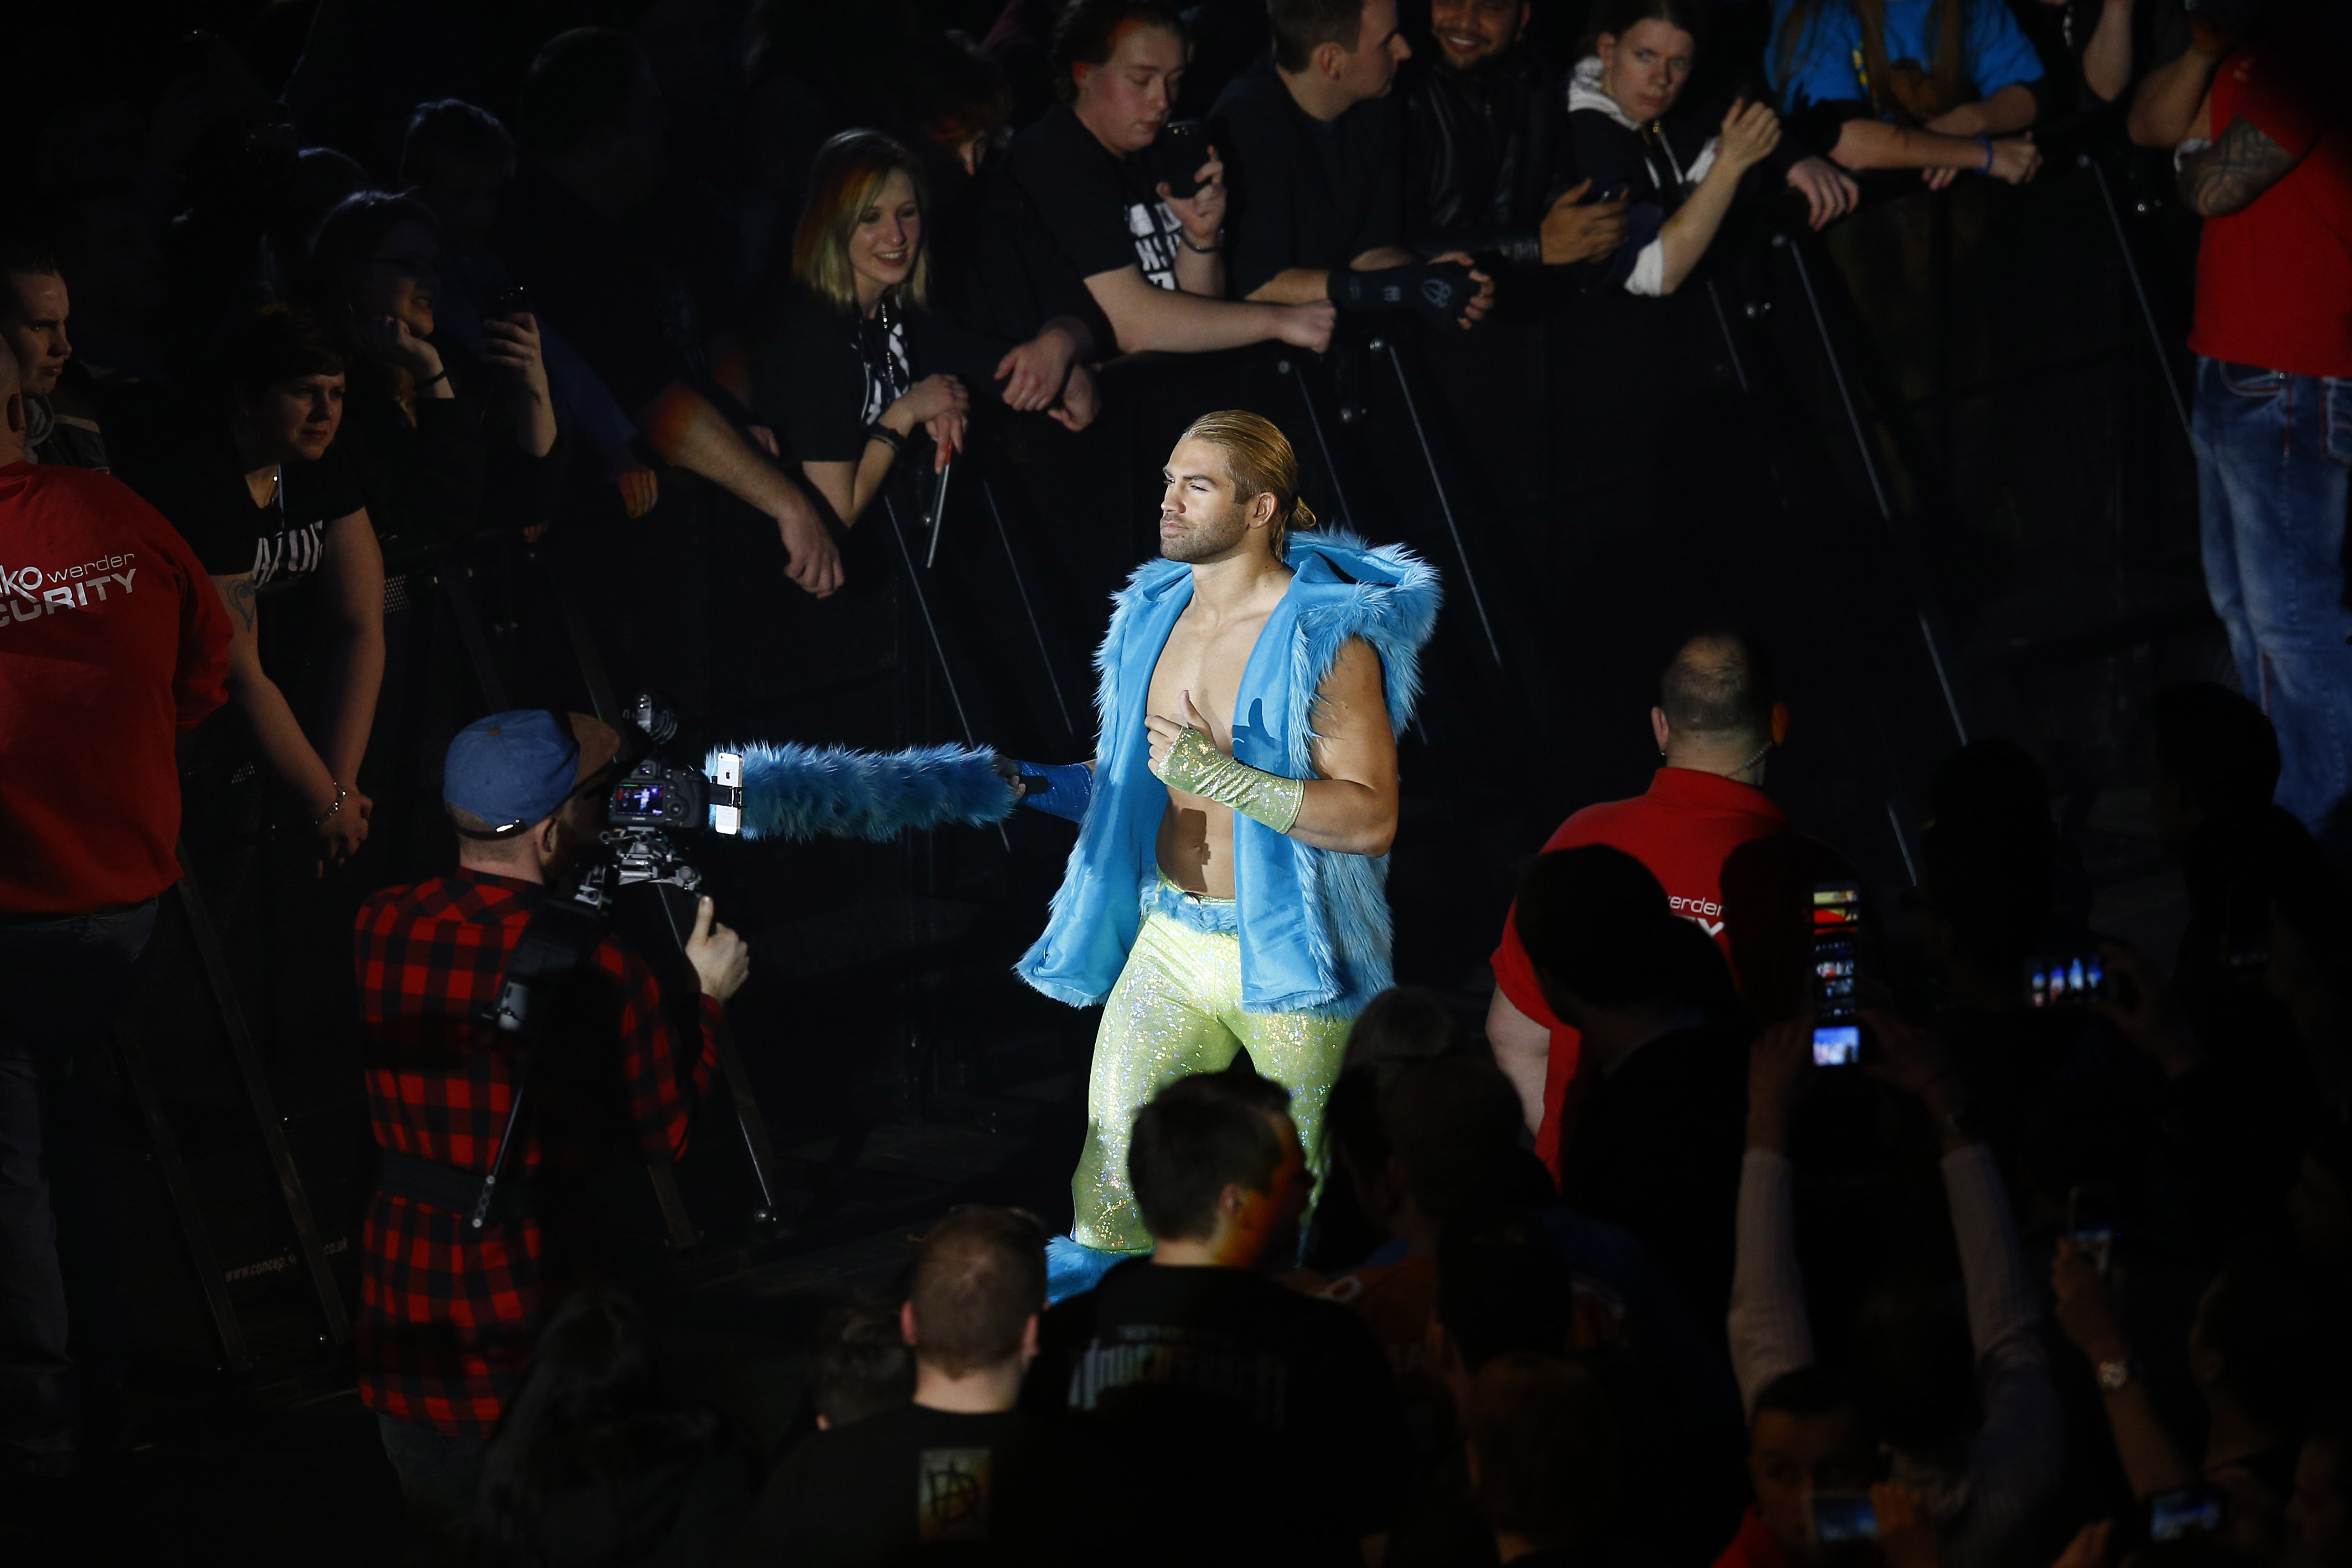 BREMEN, GERMANY - FEBRUARY 10:   Tyler Breeze during WWE Germany Live Bremen -  Road To Wrestlemania at OVB-Arena on February 10, 2016 in Bremen, Germany.  (Photo by Joachim Sielski/Bongarts/Getty Images)